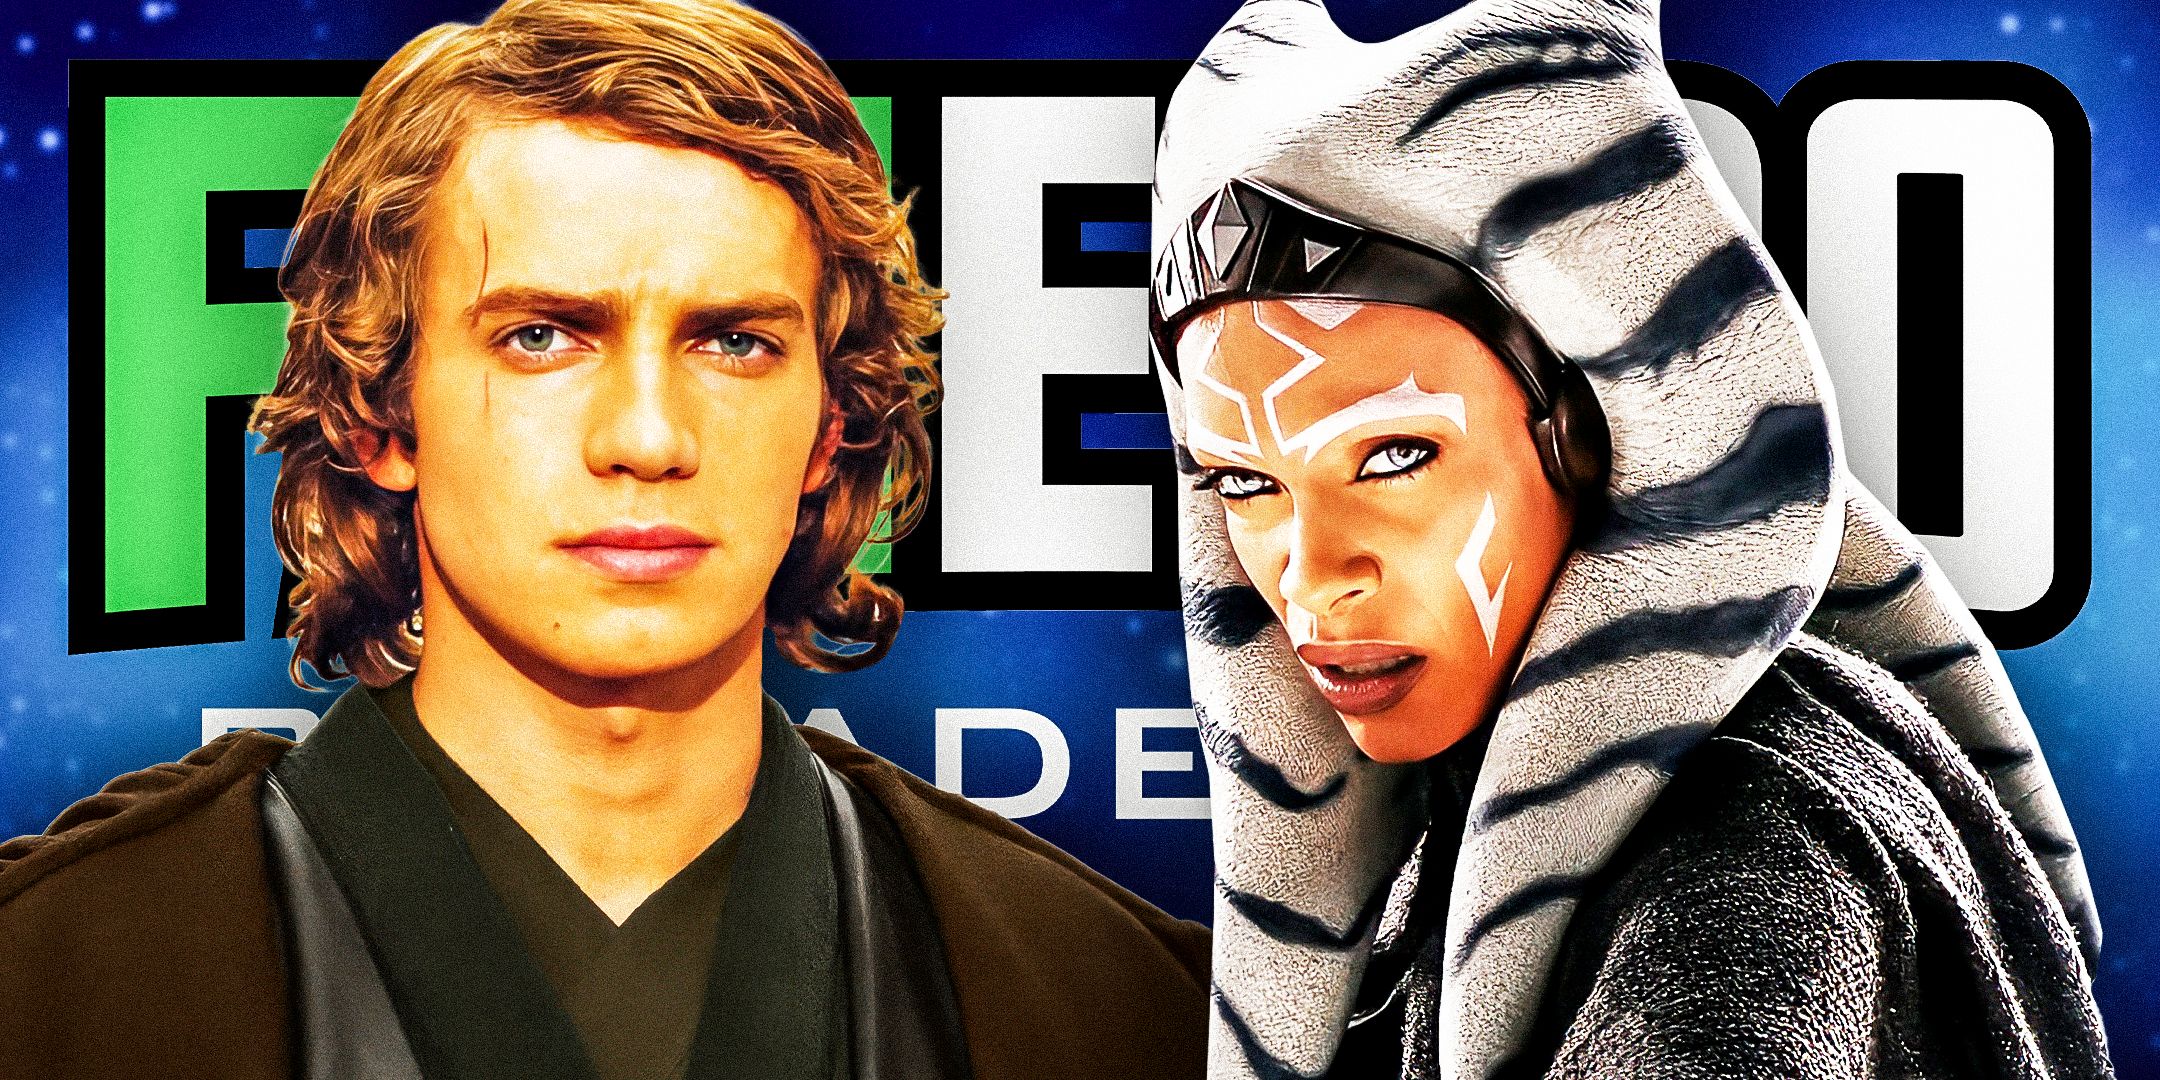 Hayden Christensen as Anakin Skywalker and Rosario Dawson as Ahsoka Tano both looking ahead seriously in front of the Fan Expo Philadelphia banner